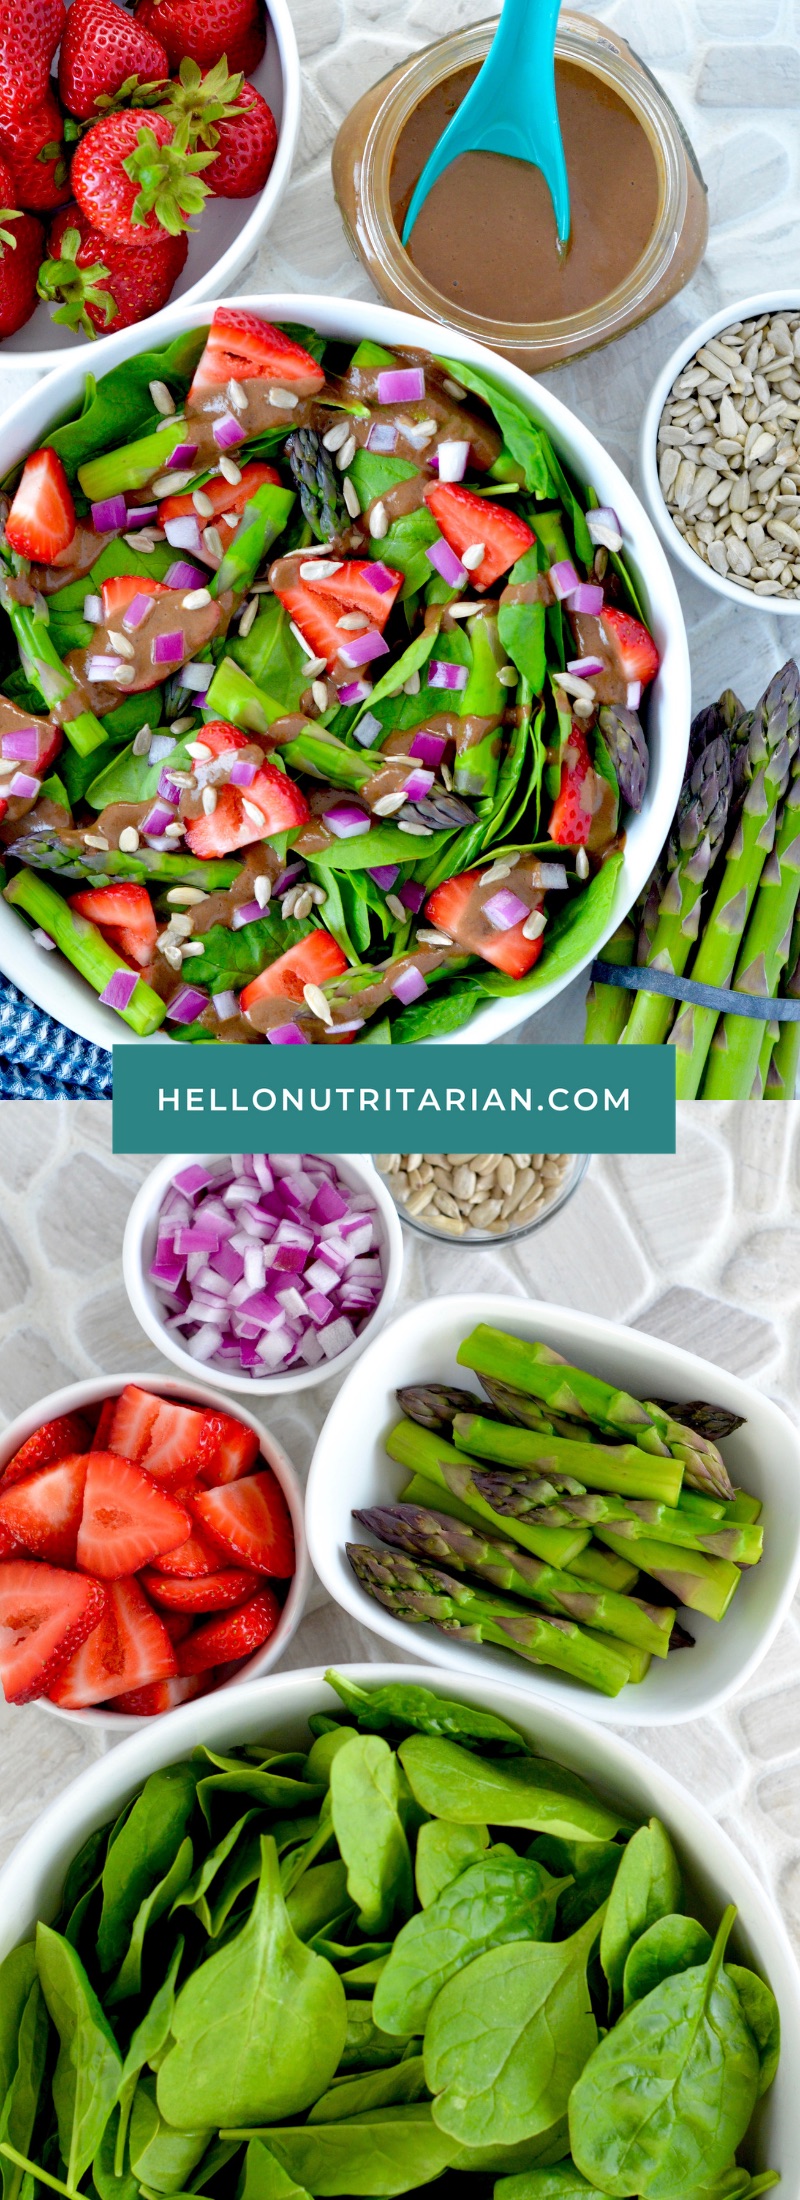 Oil Free Strawberry Spinach and Asparagus Salad Recipe By Hello Nutritarian Vegan WFPB SOS-Free Whole30 Dr Fuhrman eat to Live diet plan review Dr Greger How Not to Diet Chef AJ